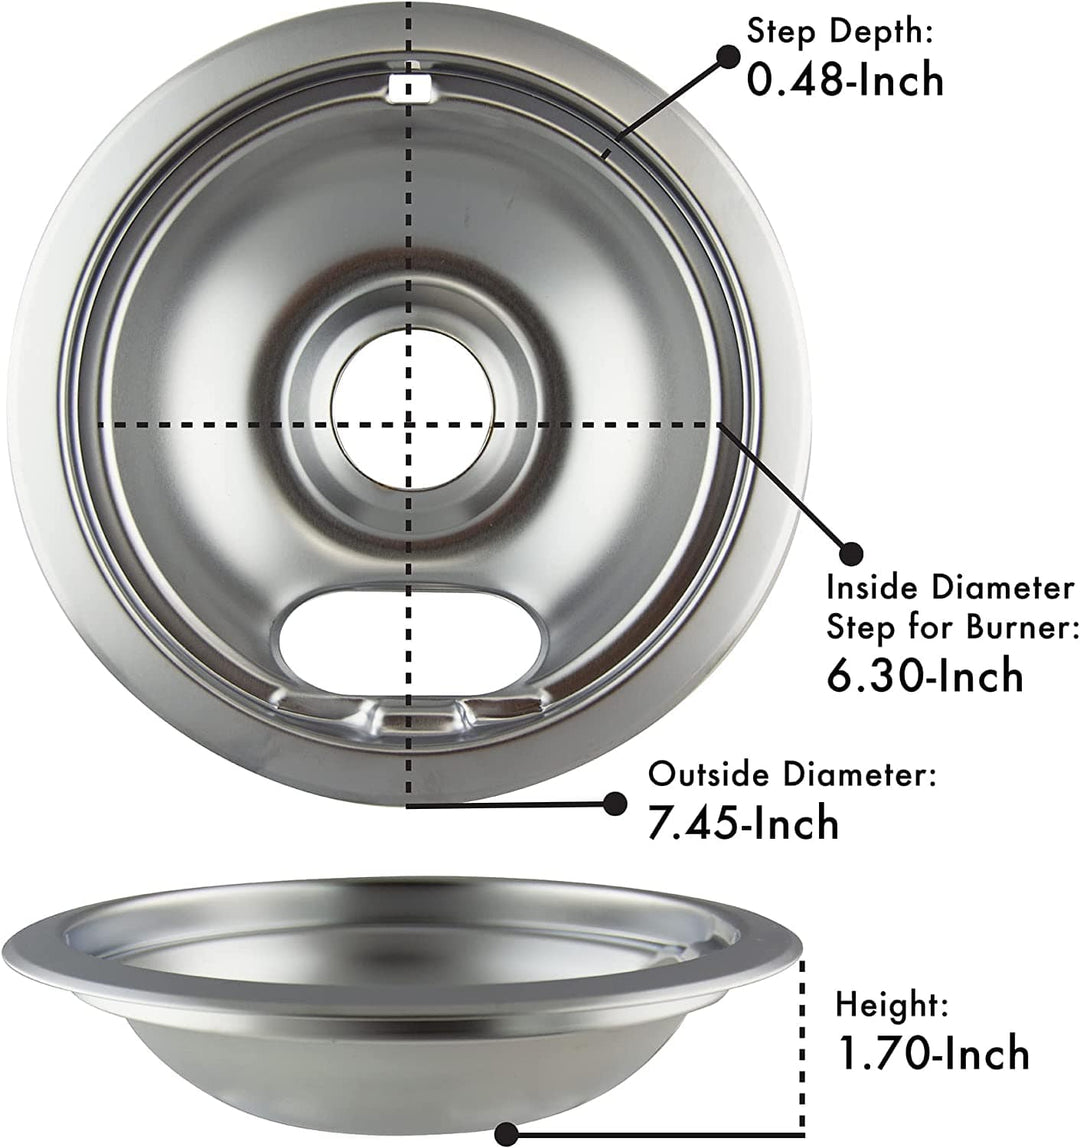 Range Kleen Range Kleen 10124XN Style A 4-Pack Drip Pans - 2 Small and 2 Large Drip Bowls